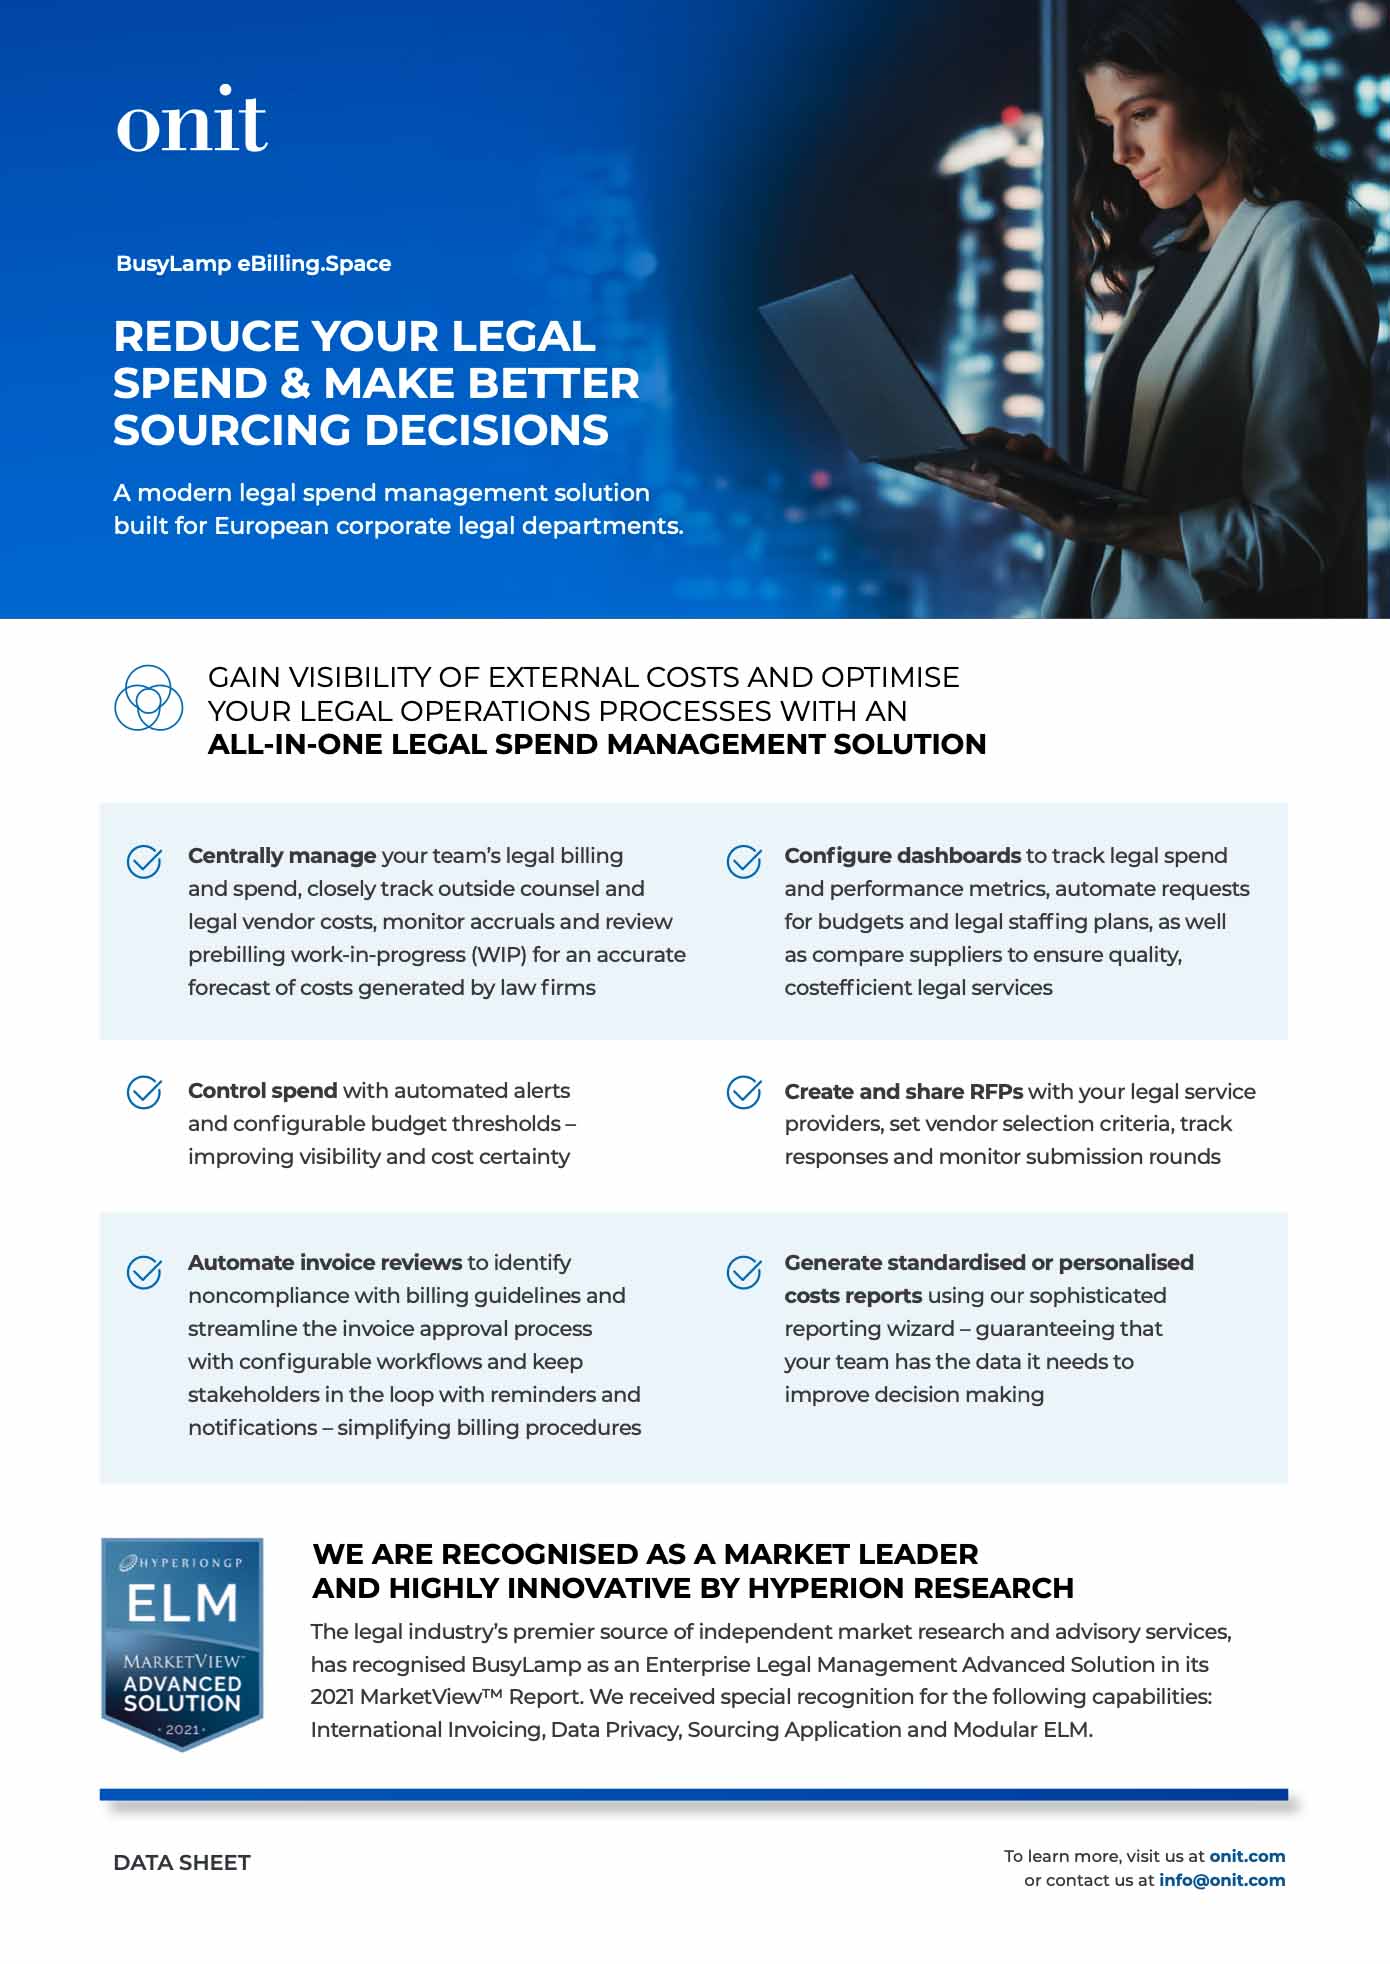 Reduce your legal spend & make better sourcing decisions